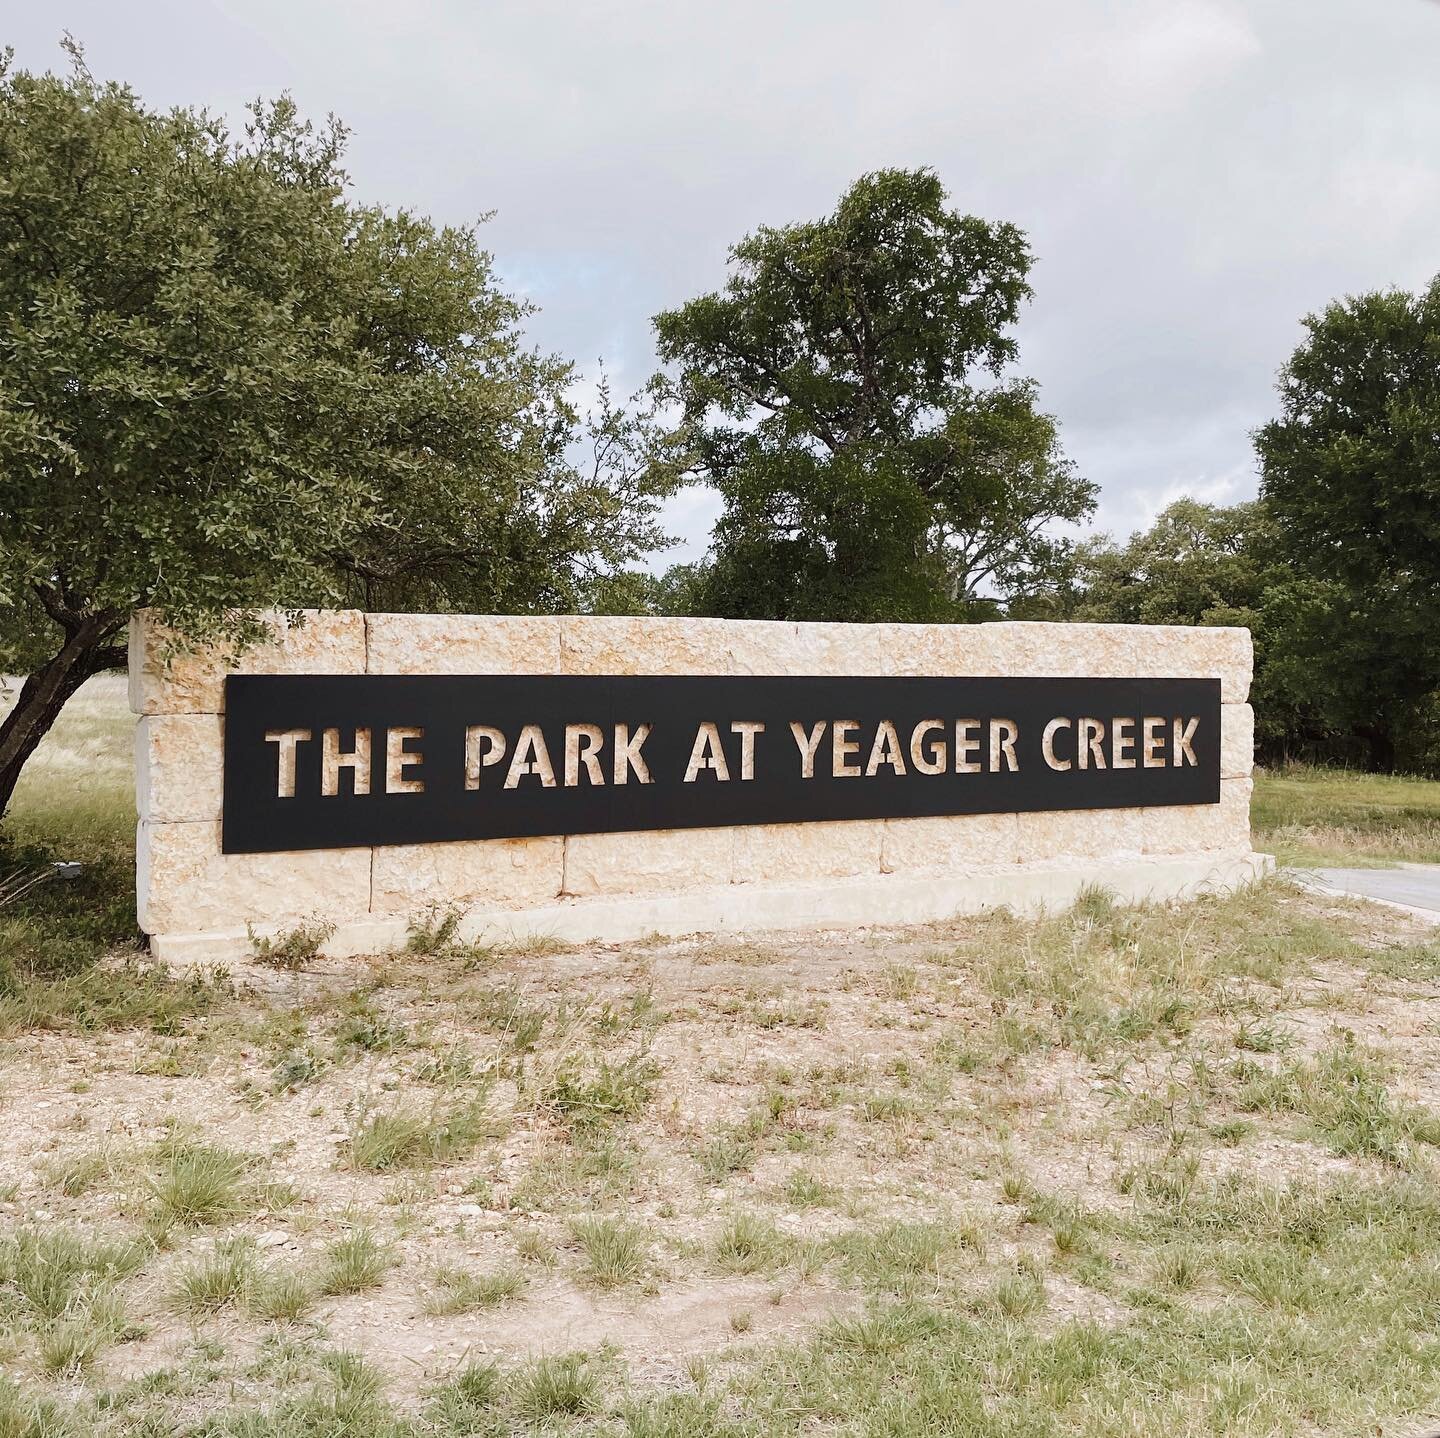 Finally got our new front entrance sign hung and we are loving the statement it makes! Welcome to the Park at Yeager Creek ✨